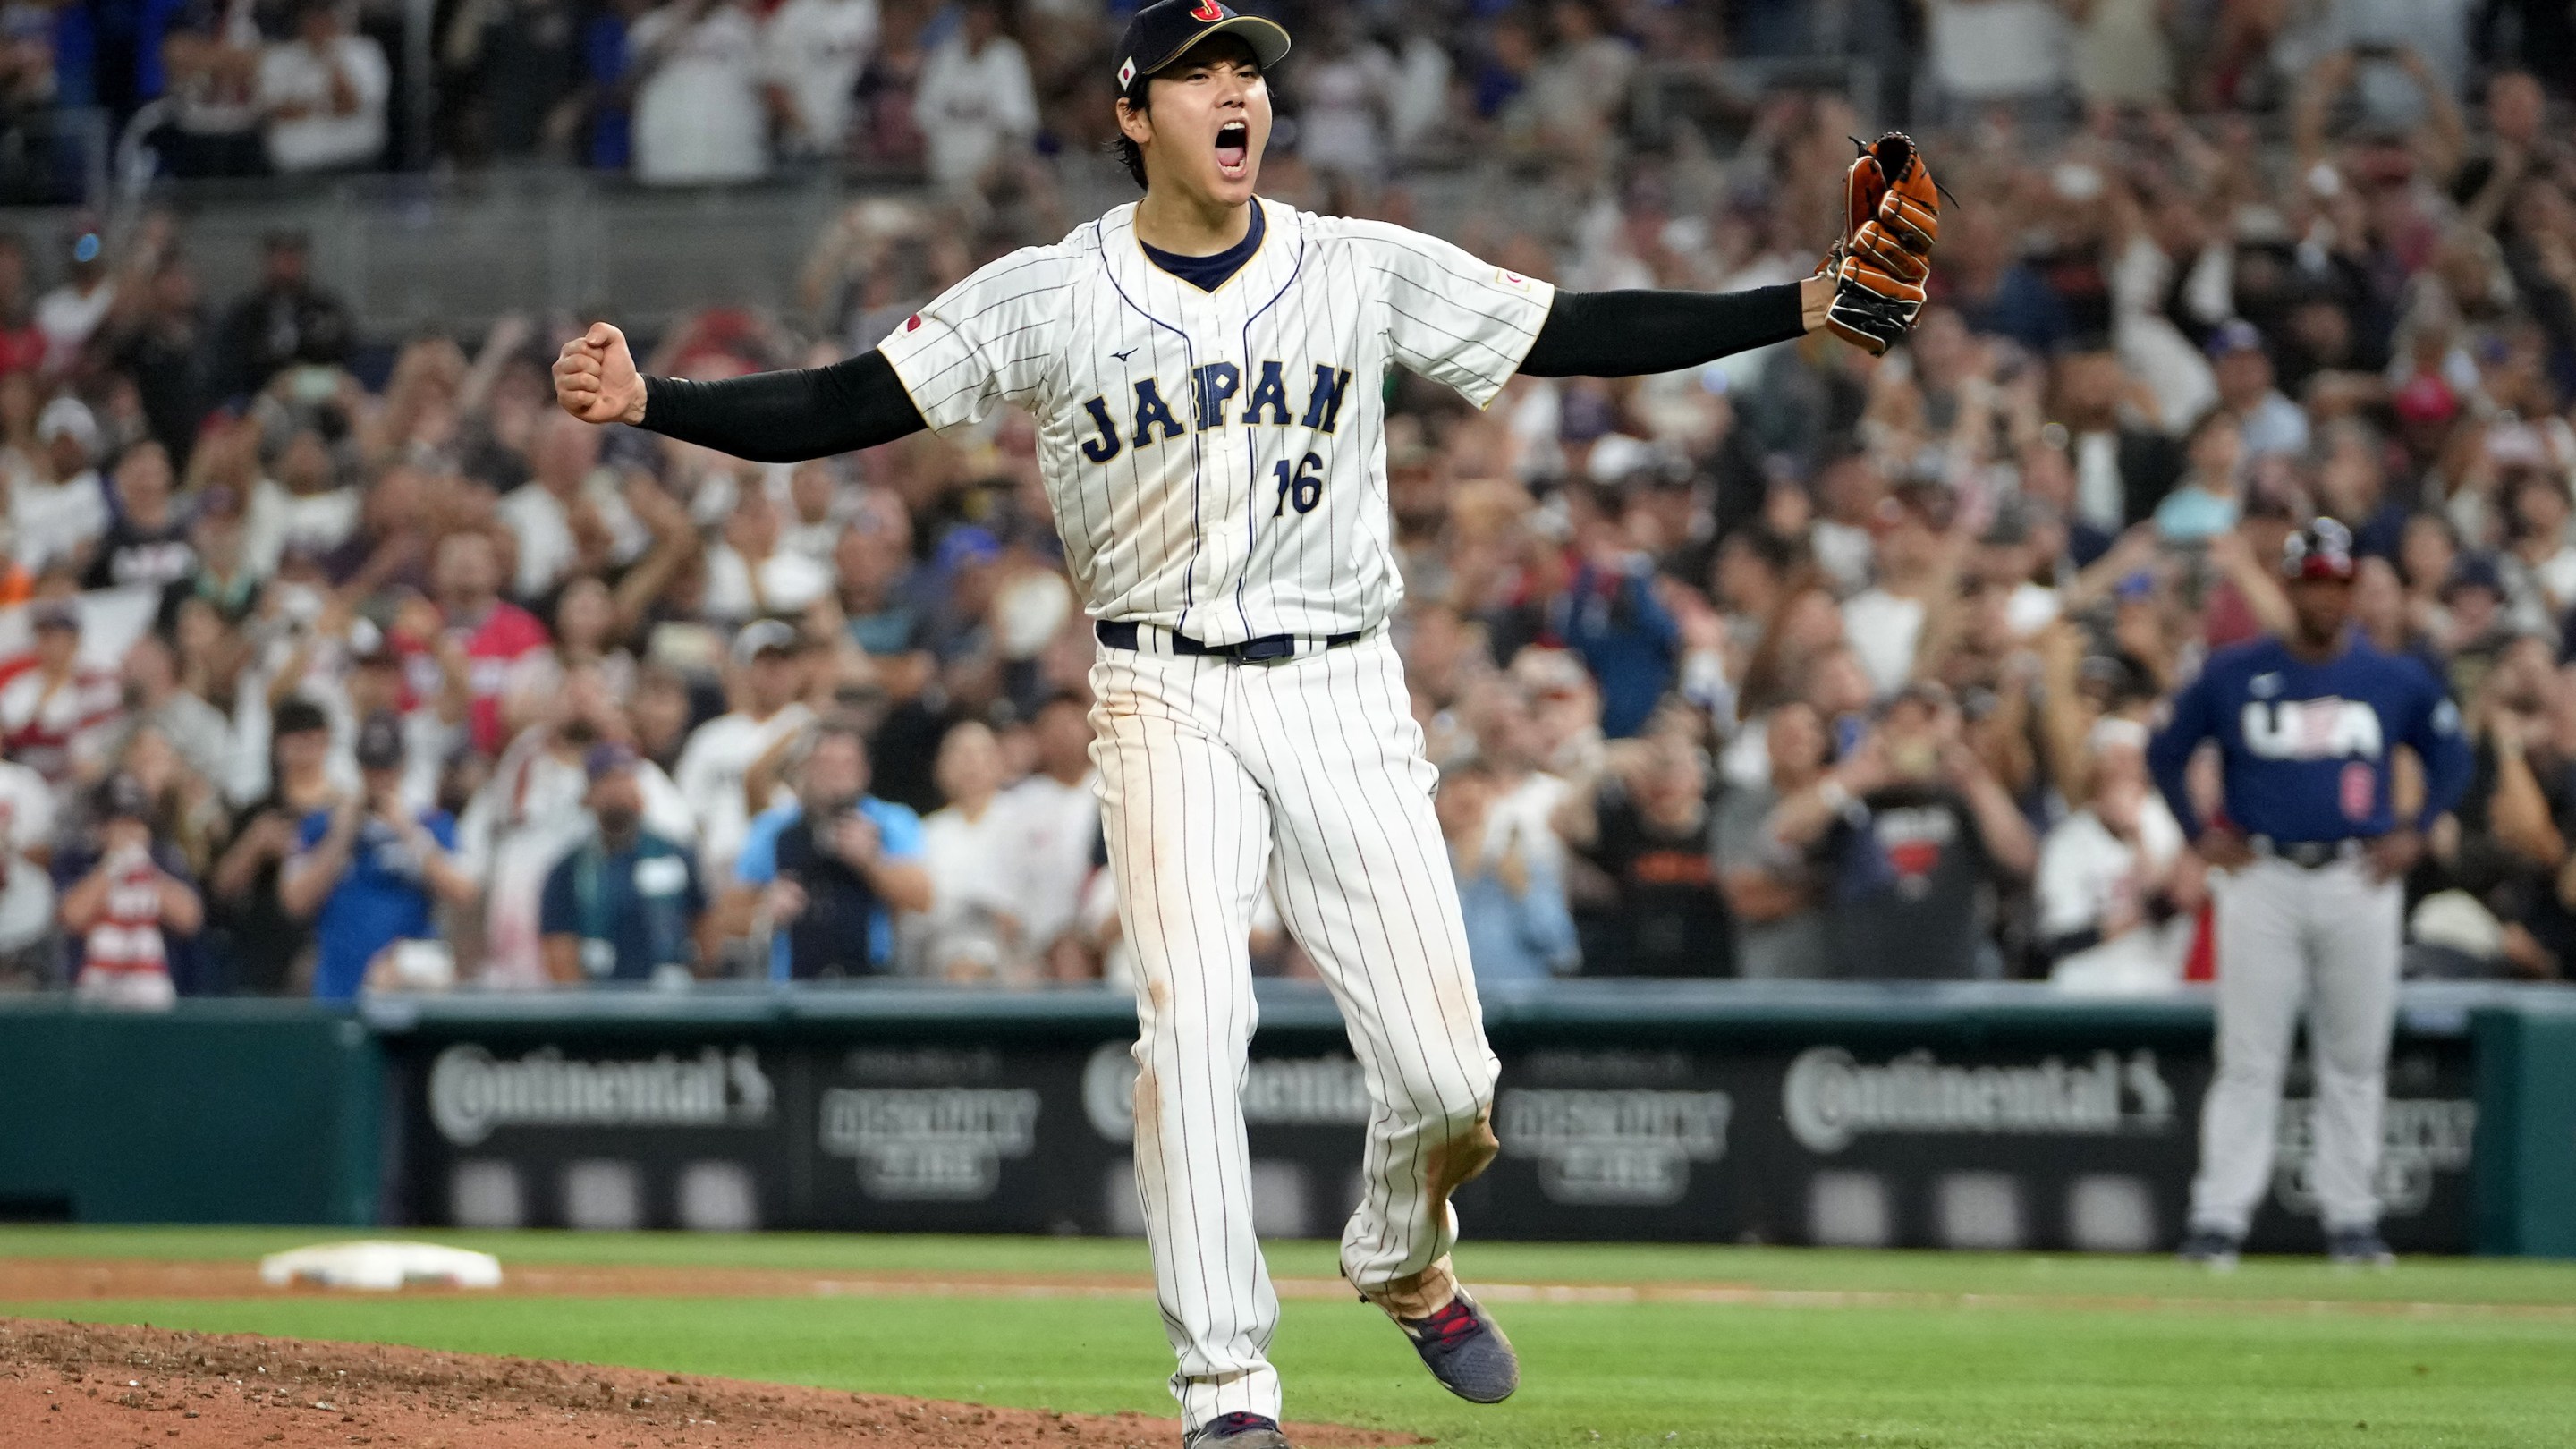 Shohei Ohtani exultantly celebrating after getting the final out in Japan's victory over Team USA in the World Baseball Classic.